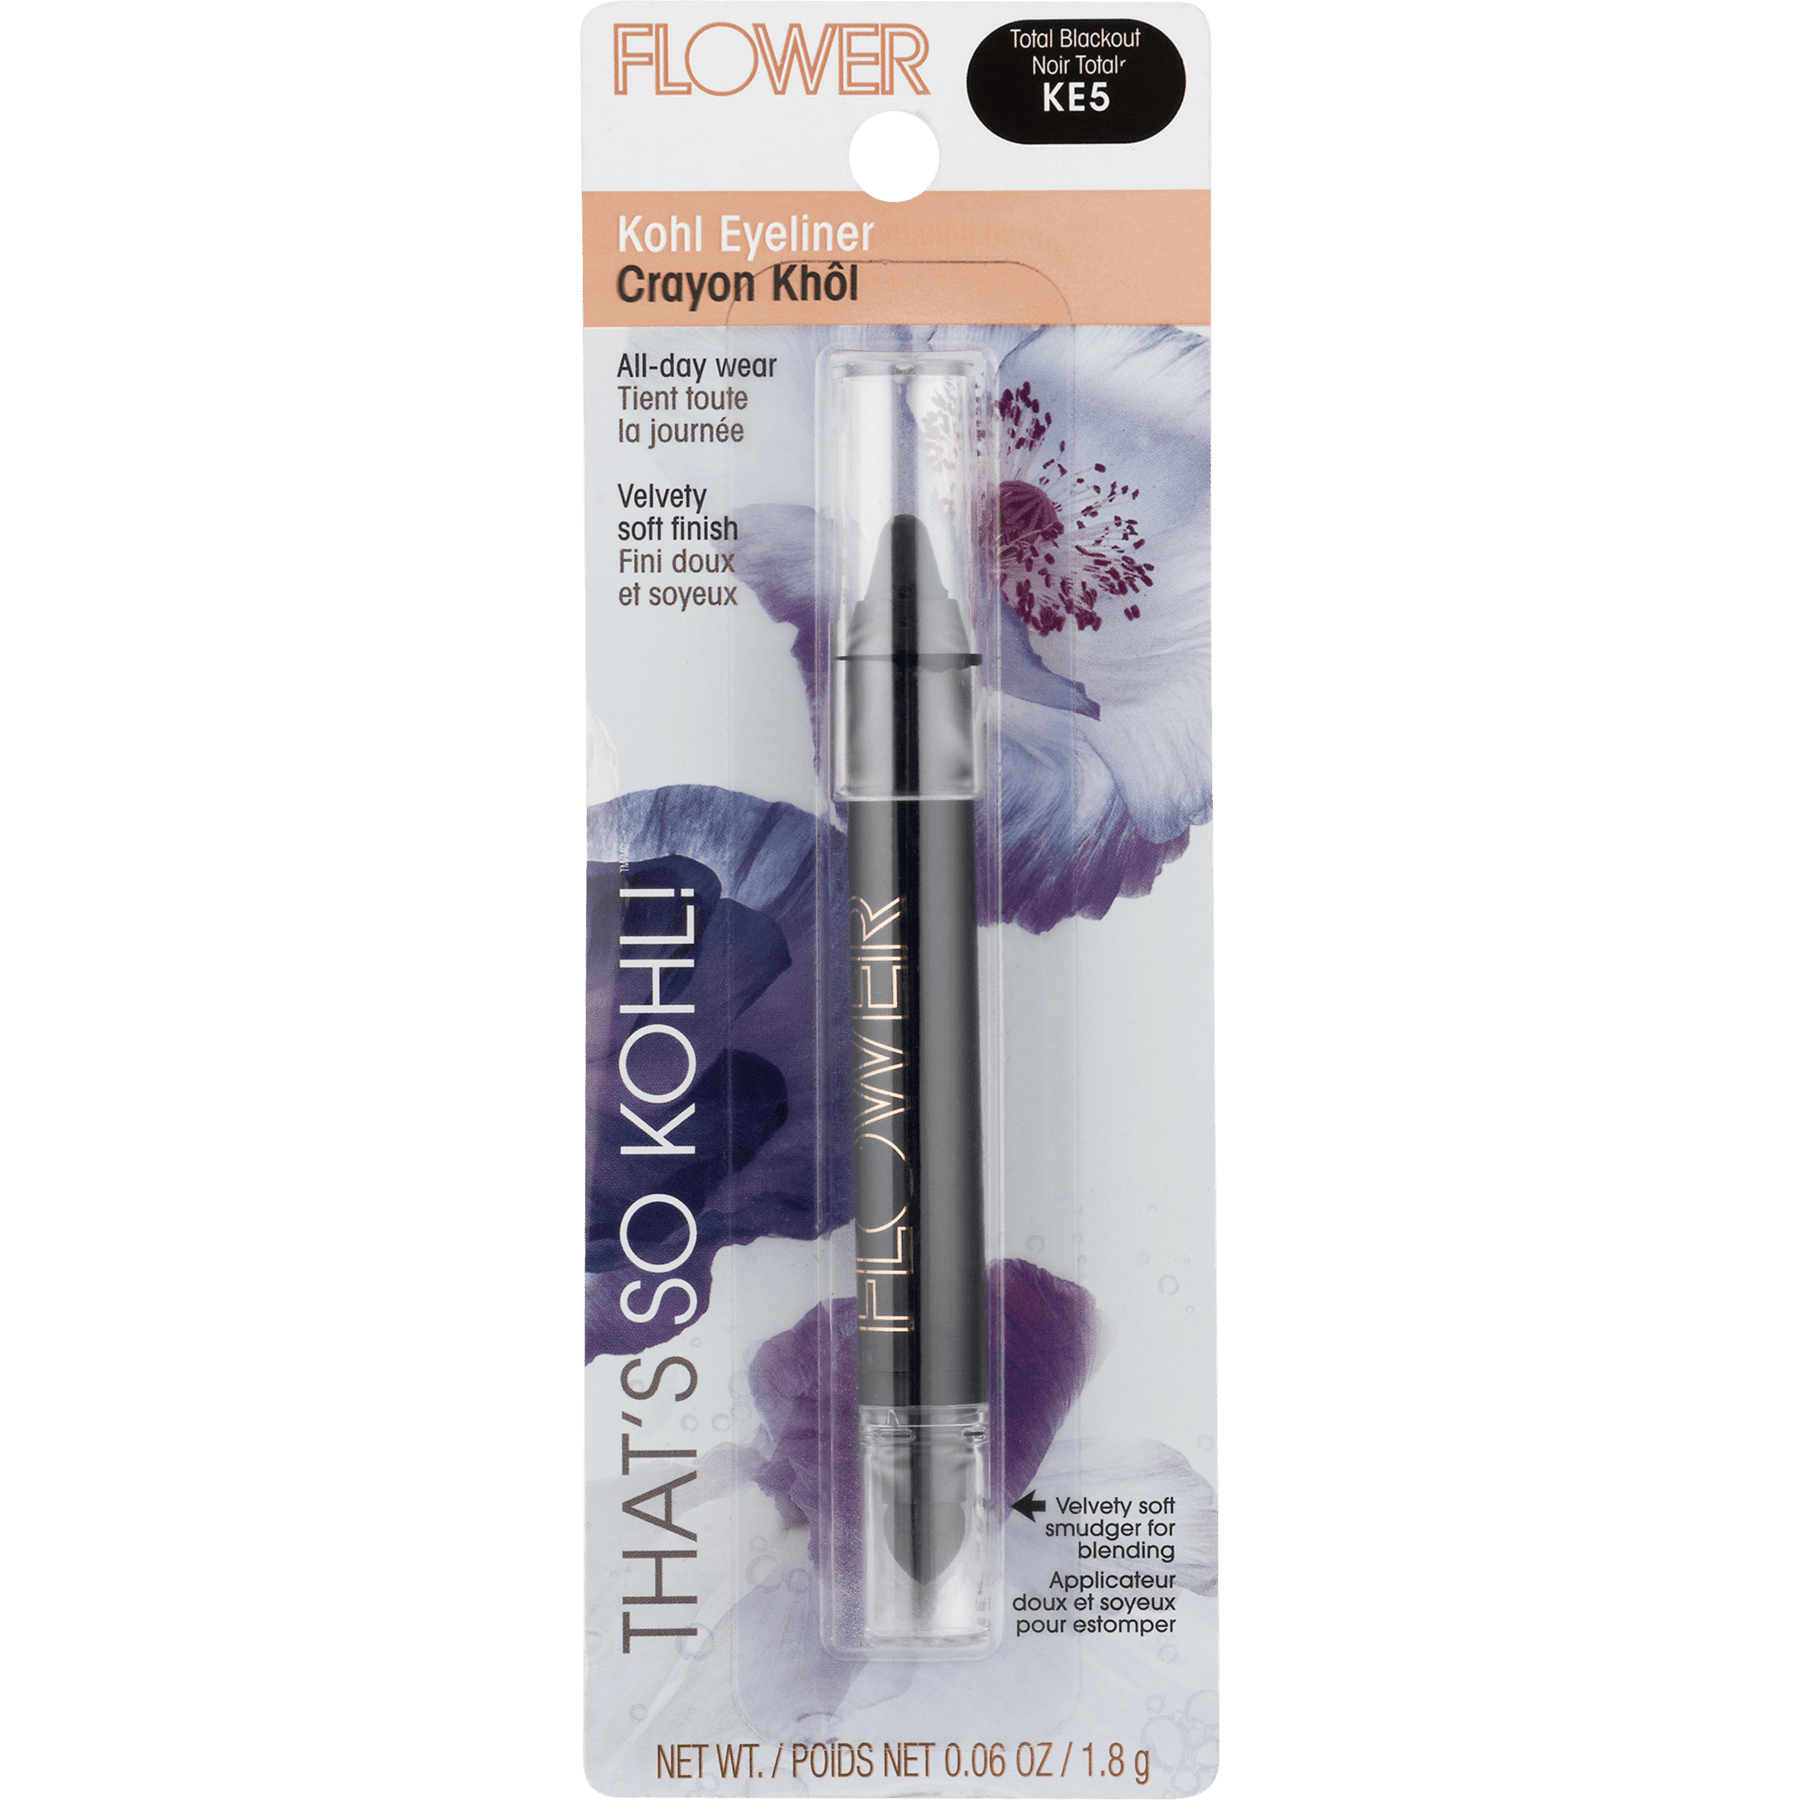 New From FLOWER Beauty: Lip Radiance High Shine Lip Lacquer Extremes,  That's So Kohl! Kohl Eyeliners and D.B. Daily Brightening Undereye Cover  Cremes - Makeup and Beauty Blog